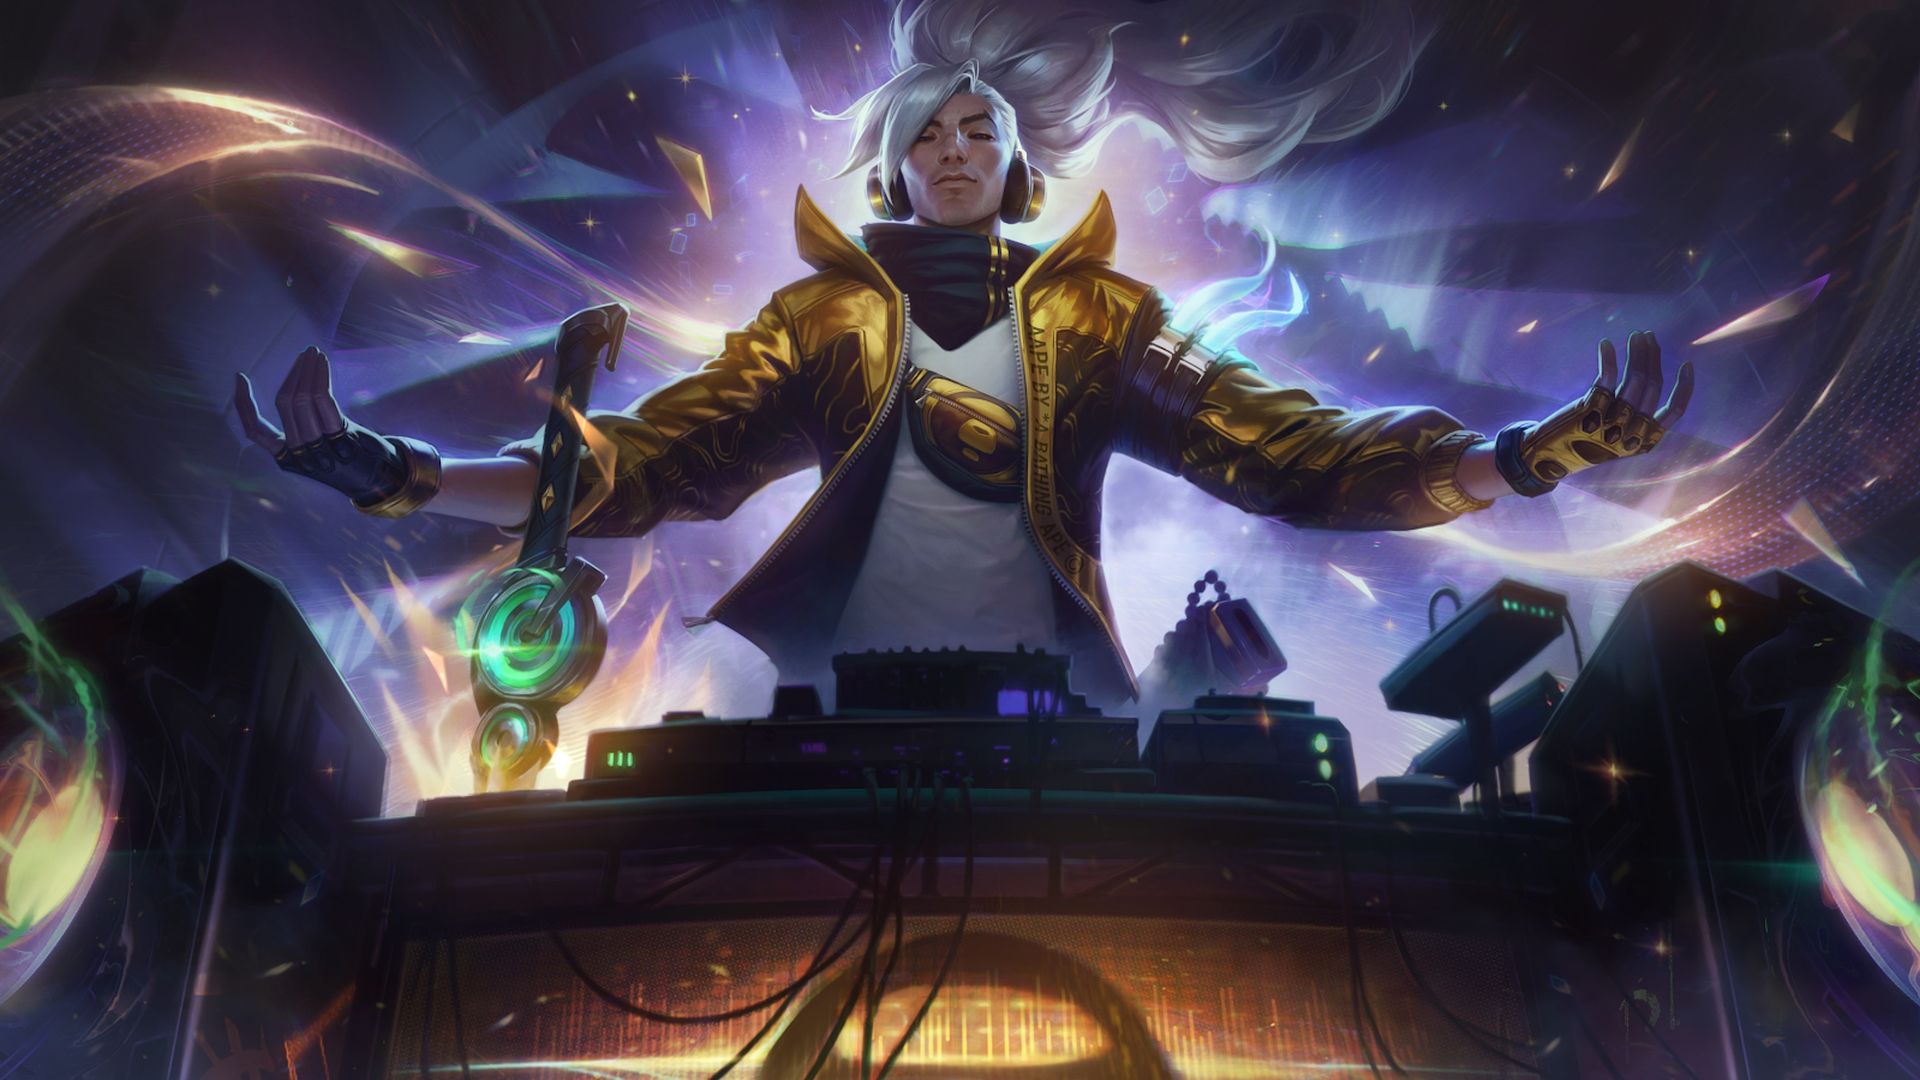 League of Legends is getting new clothing collaboration and a